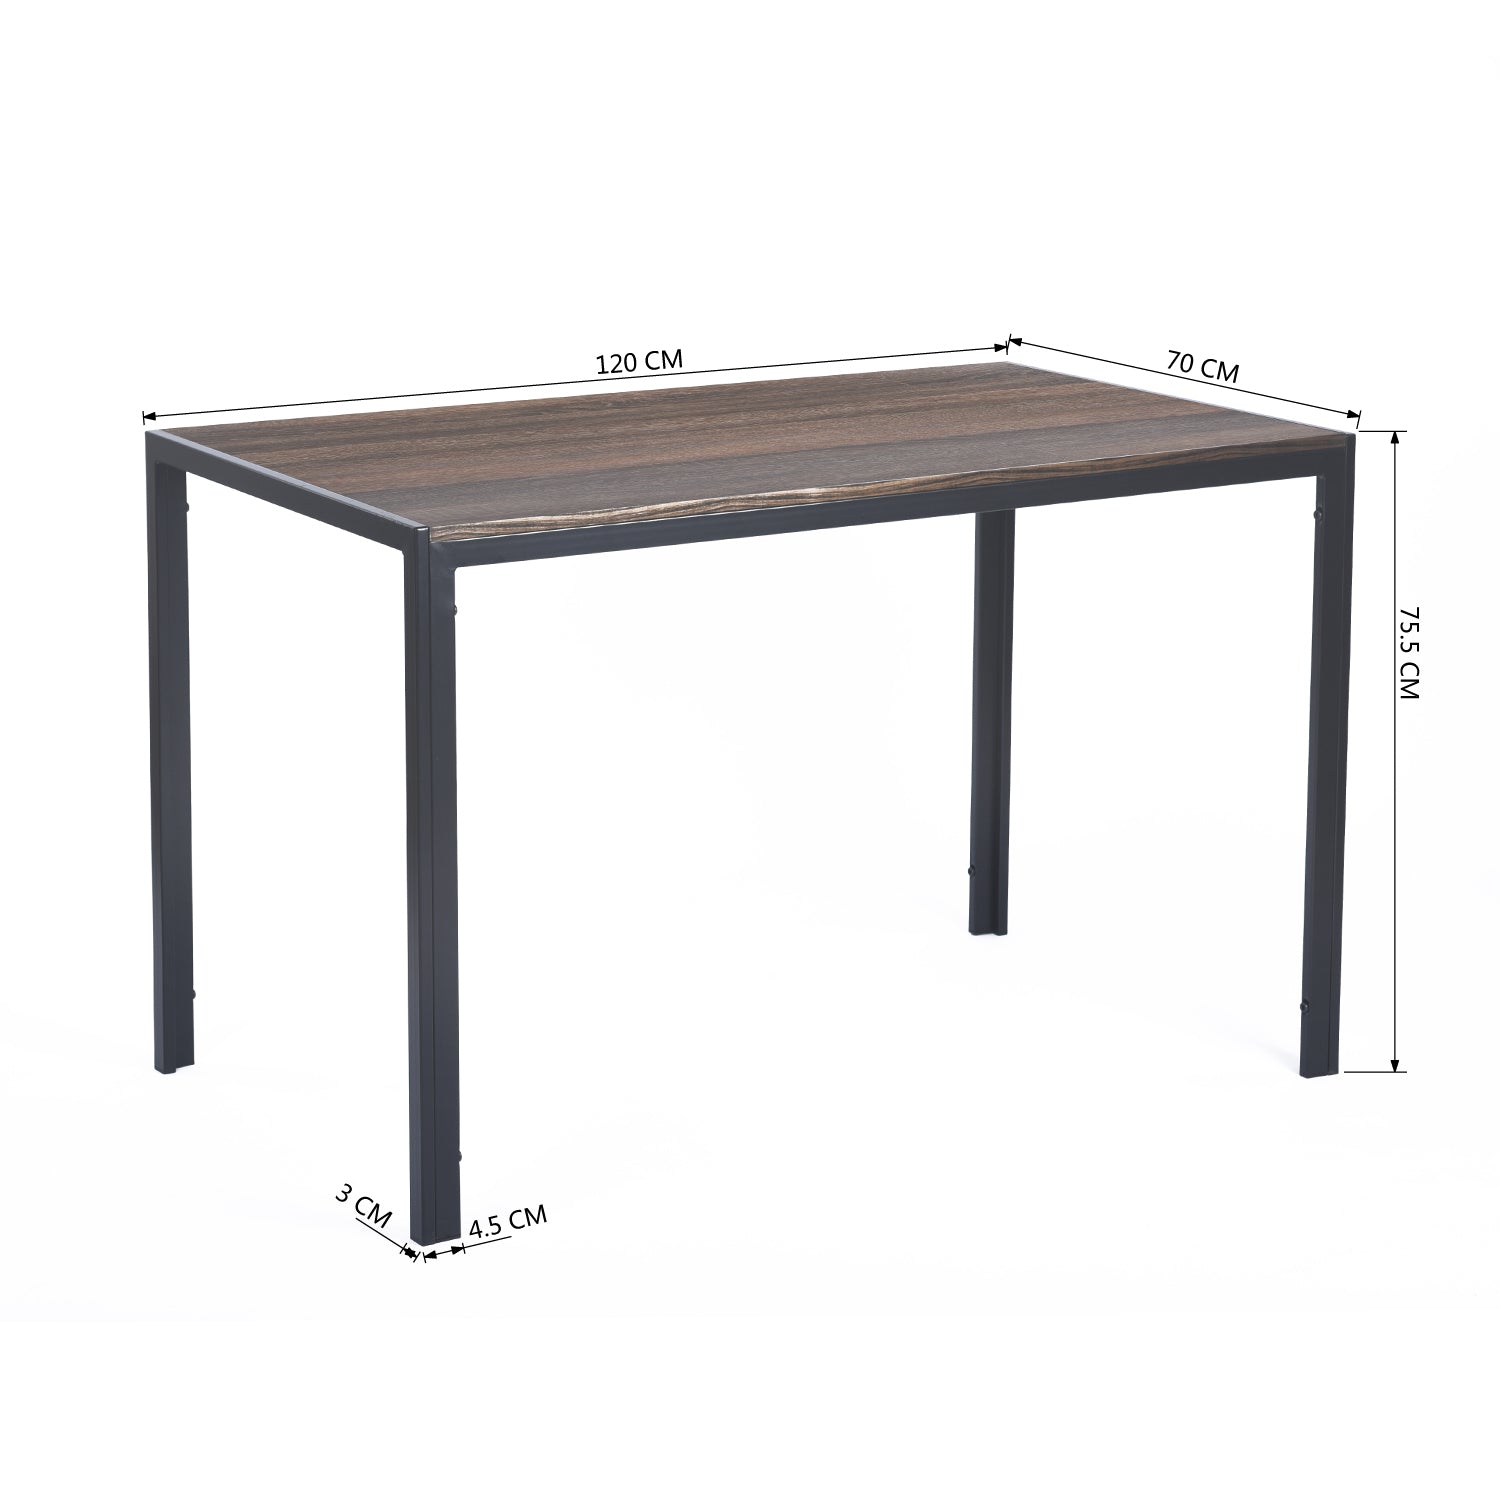 Vargas Dining Table